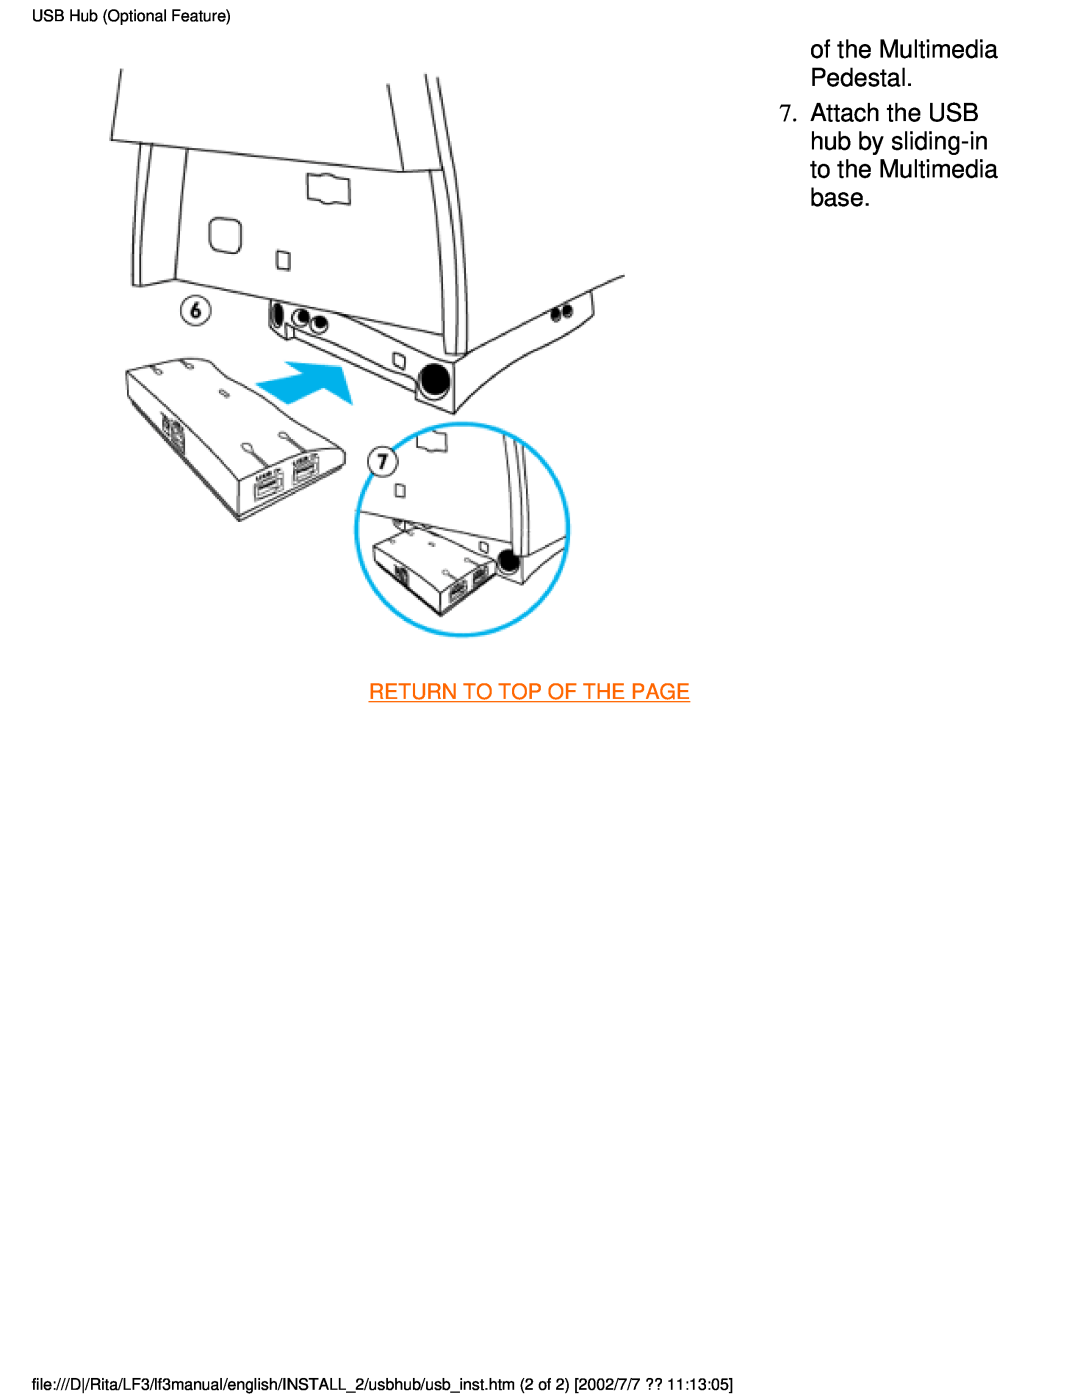 Philips 107T41 user manual of the Multimedia Pedestal, Attach the USB hub by sliding-in to the Multimedia base 